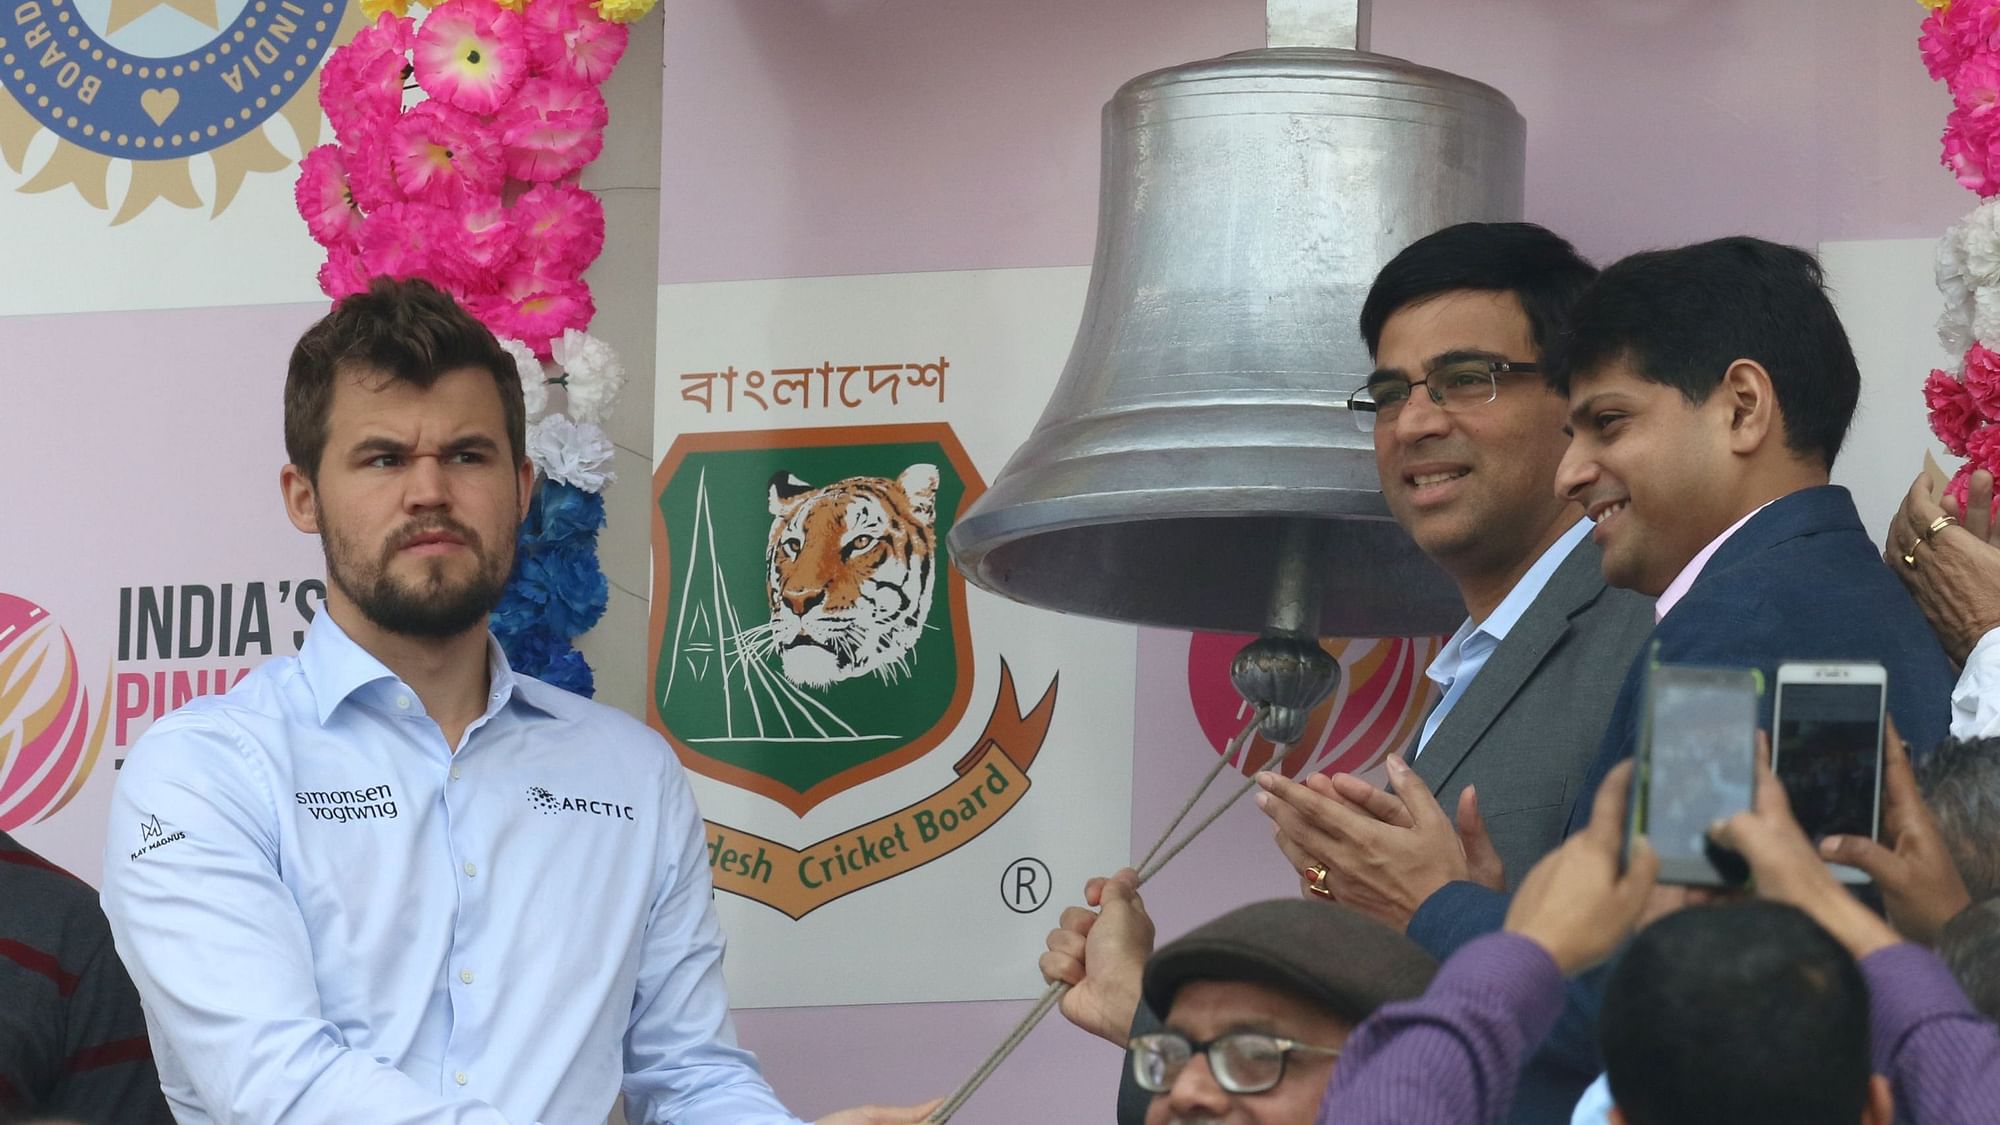 Magnus Carlsen and Viswanathan Anand ring the bell at the start of Day 2 of the India vs Bangladesh Test held at the Eden Gardens Stadium.